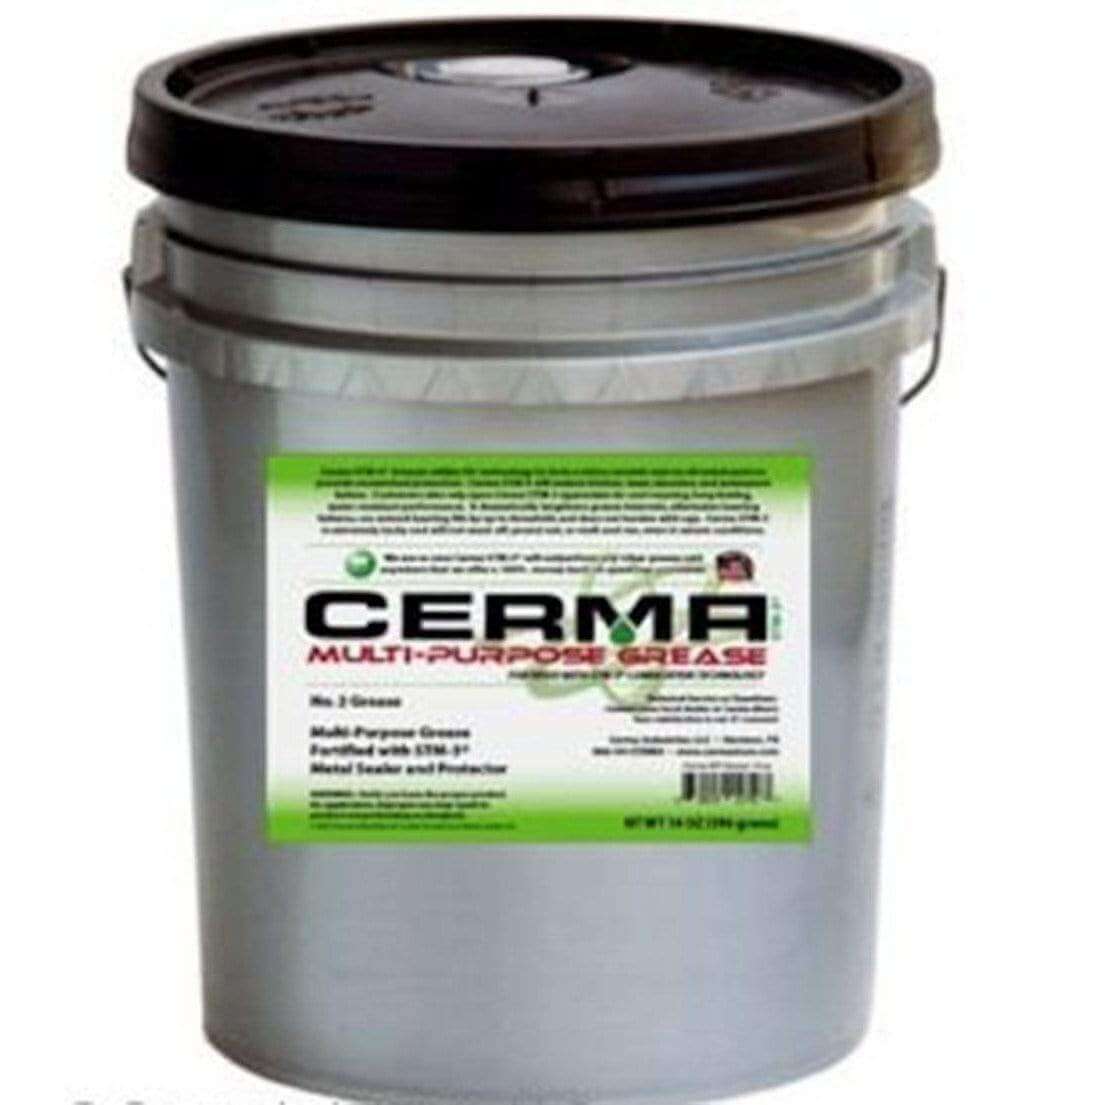 Cerma Ceramic Multi Purpose Grease at $310.5 only from cermatreatment.com